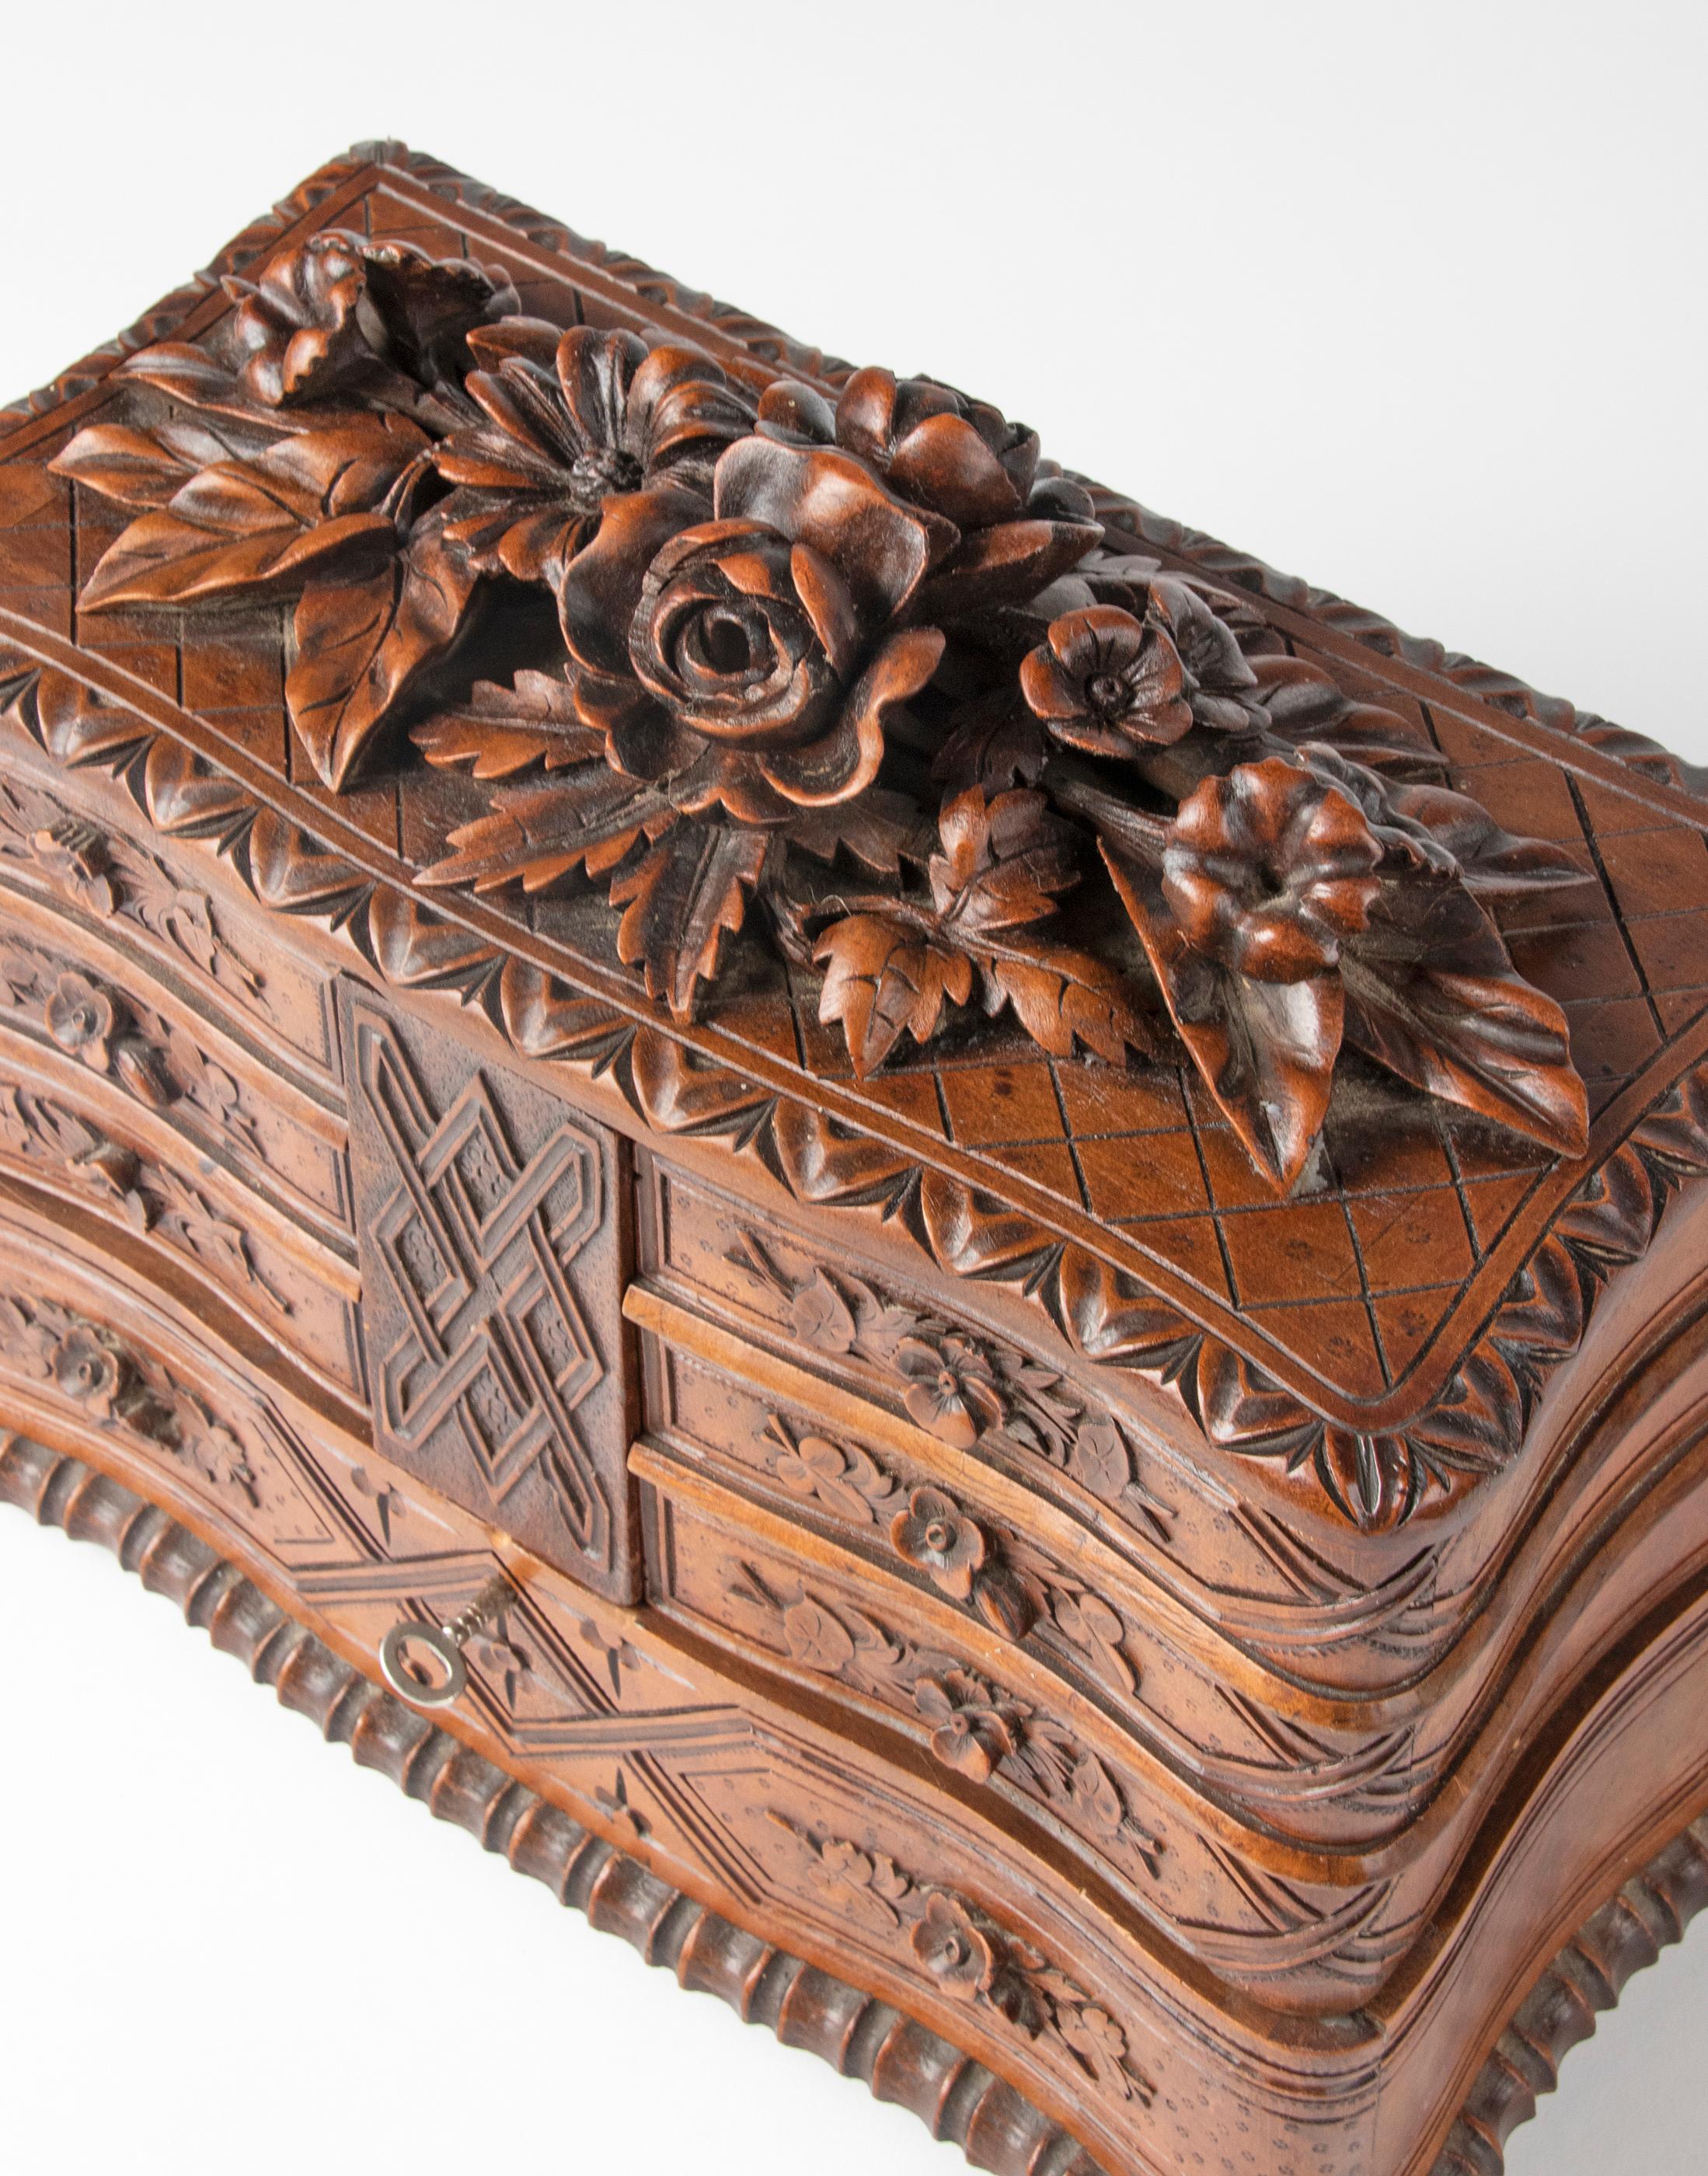 Hand-Carved 19th Century Black Forest Walnut Jewelry Chest